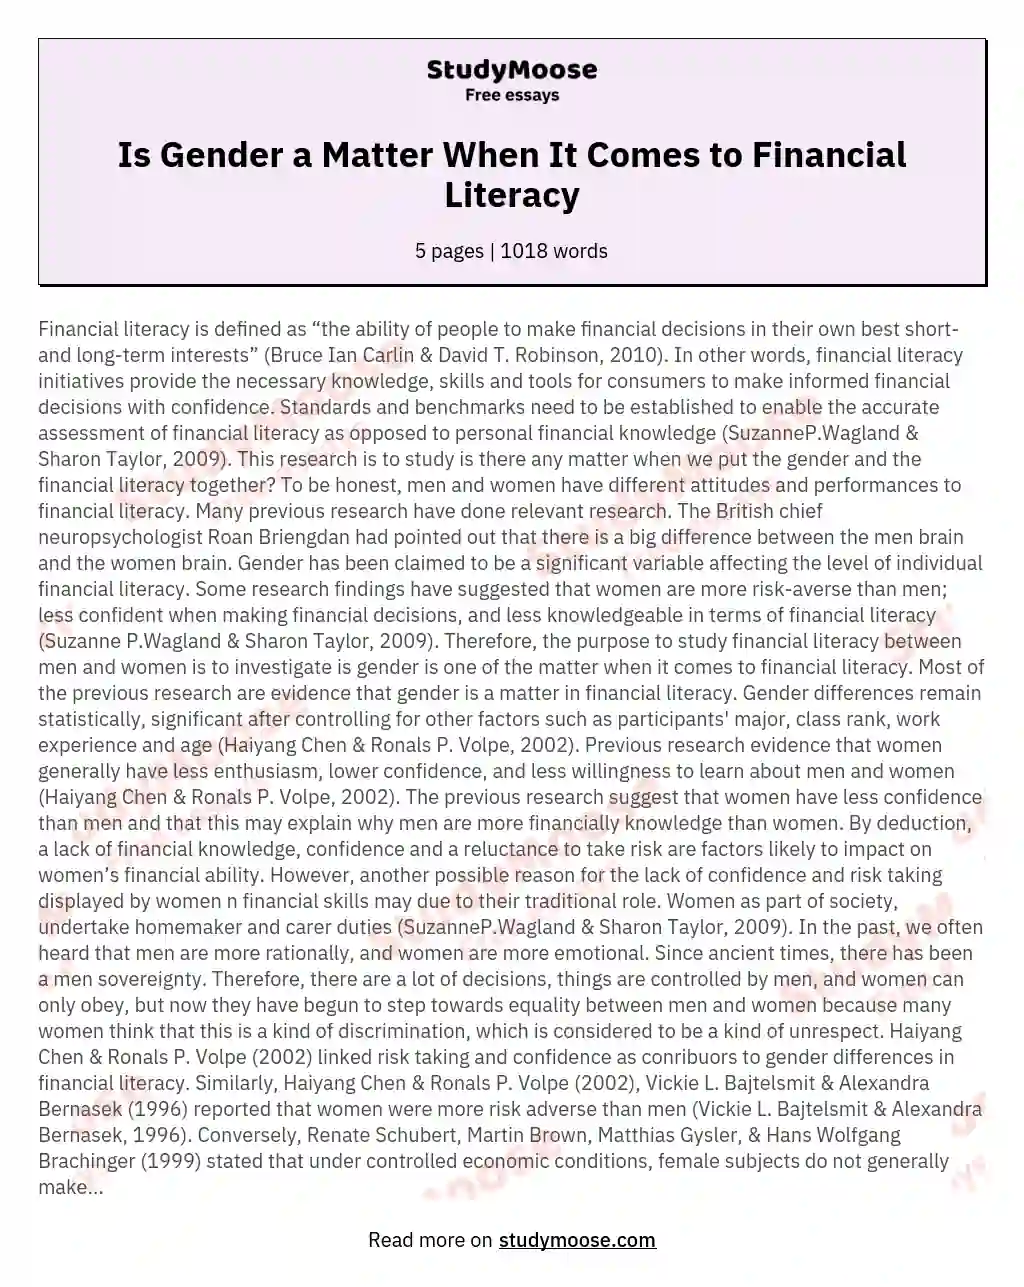 Is Gender a Matter When It Comes to Financial Literacy essay